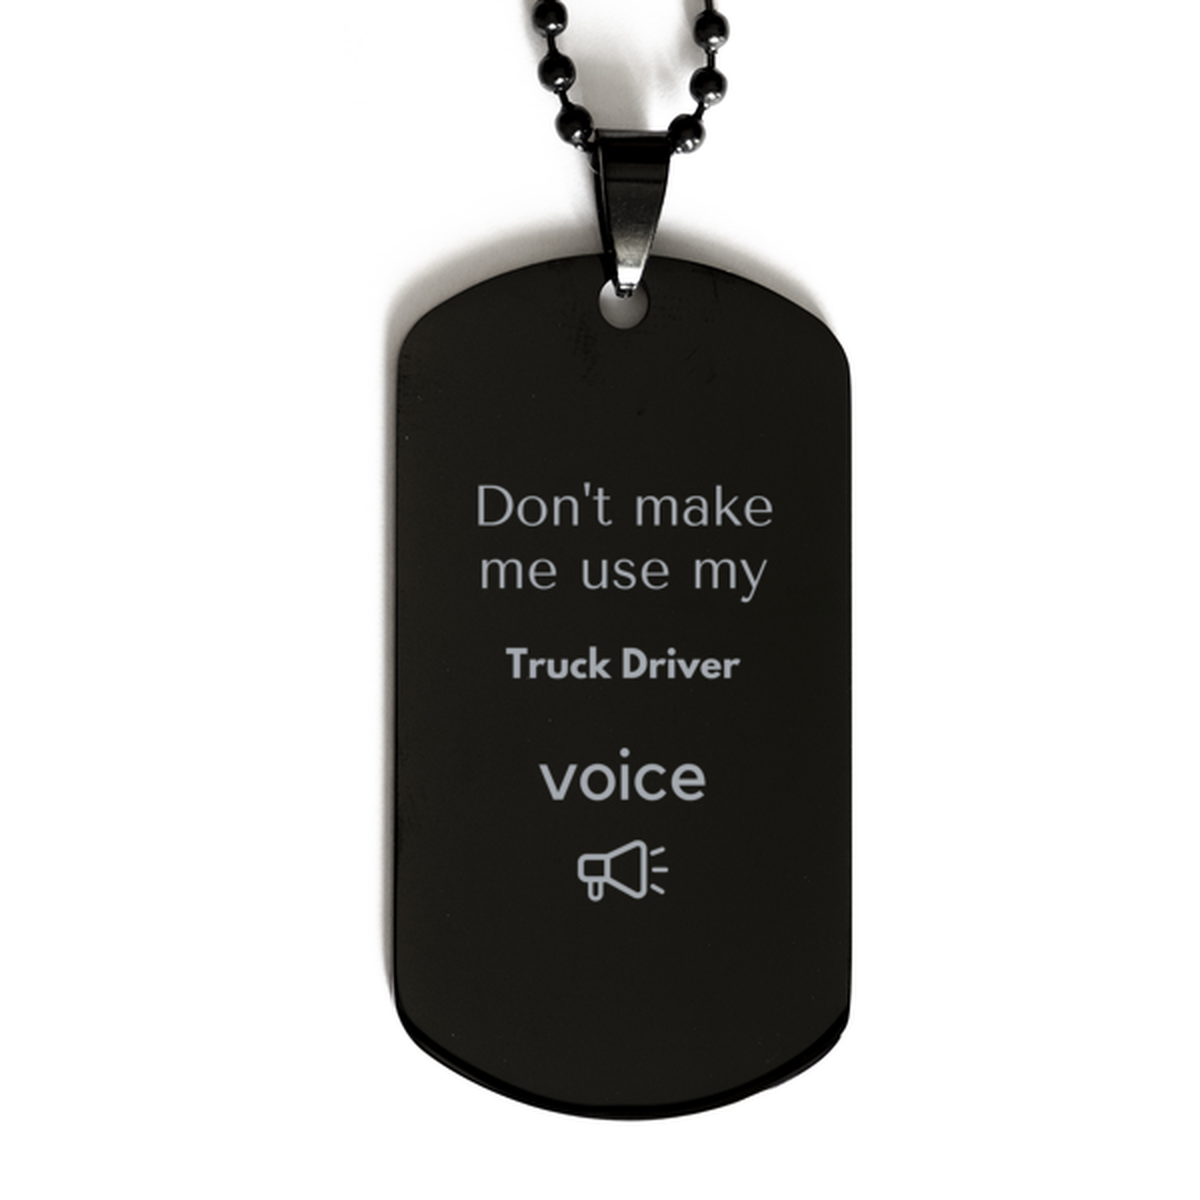 Don't make me use my Truck Driver voice, Sarcasm Truck Driver Gifts, Christmas Truck Driver Black Dog Tag Birthday Unique Gifts For Truck Driver Coworkers, Men, Women, Colleague, Friends